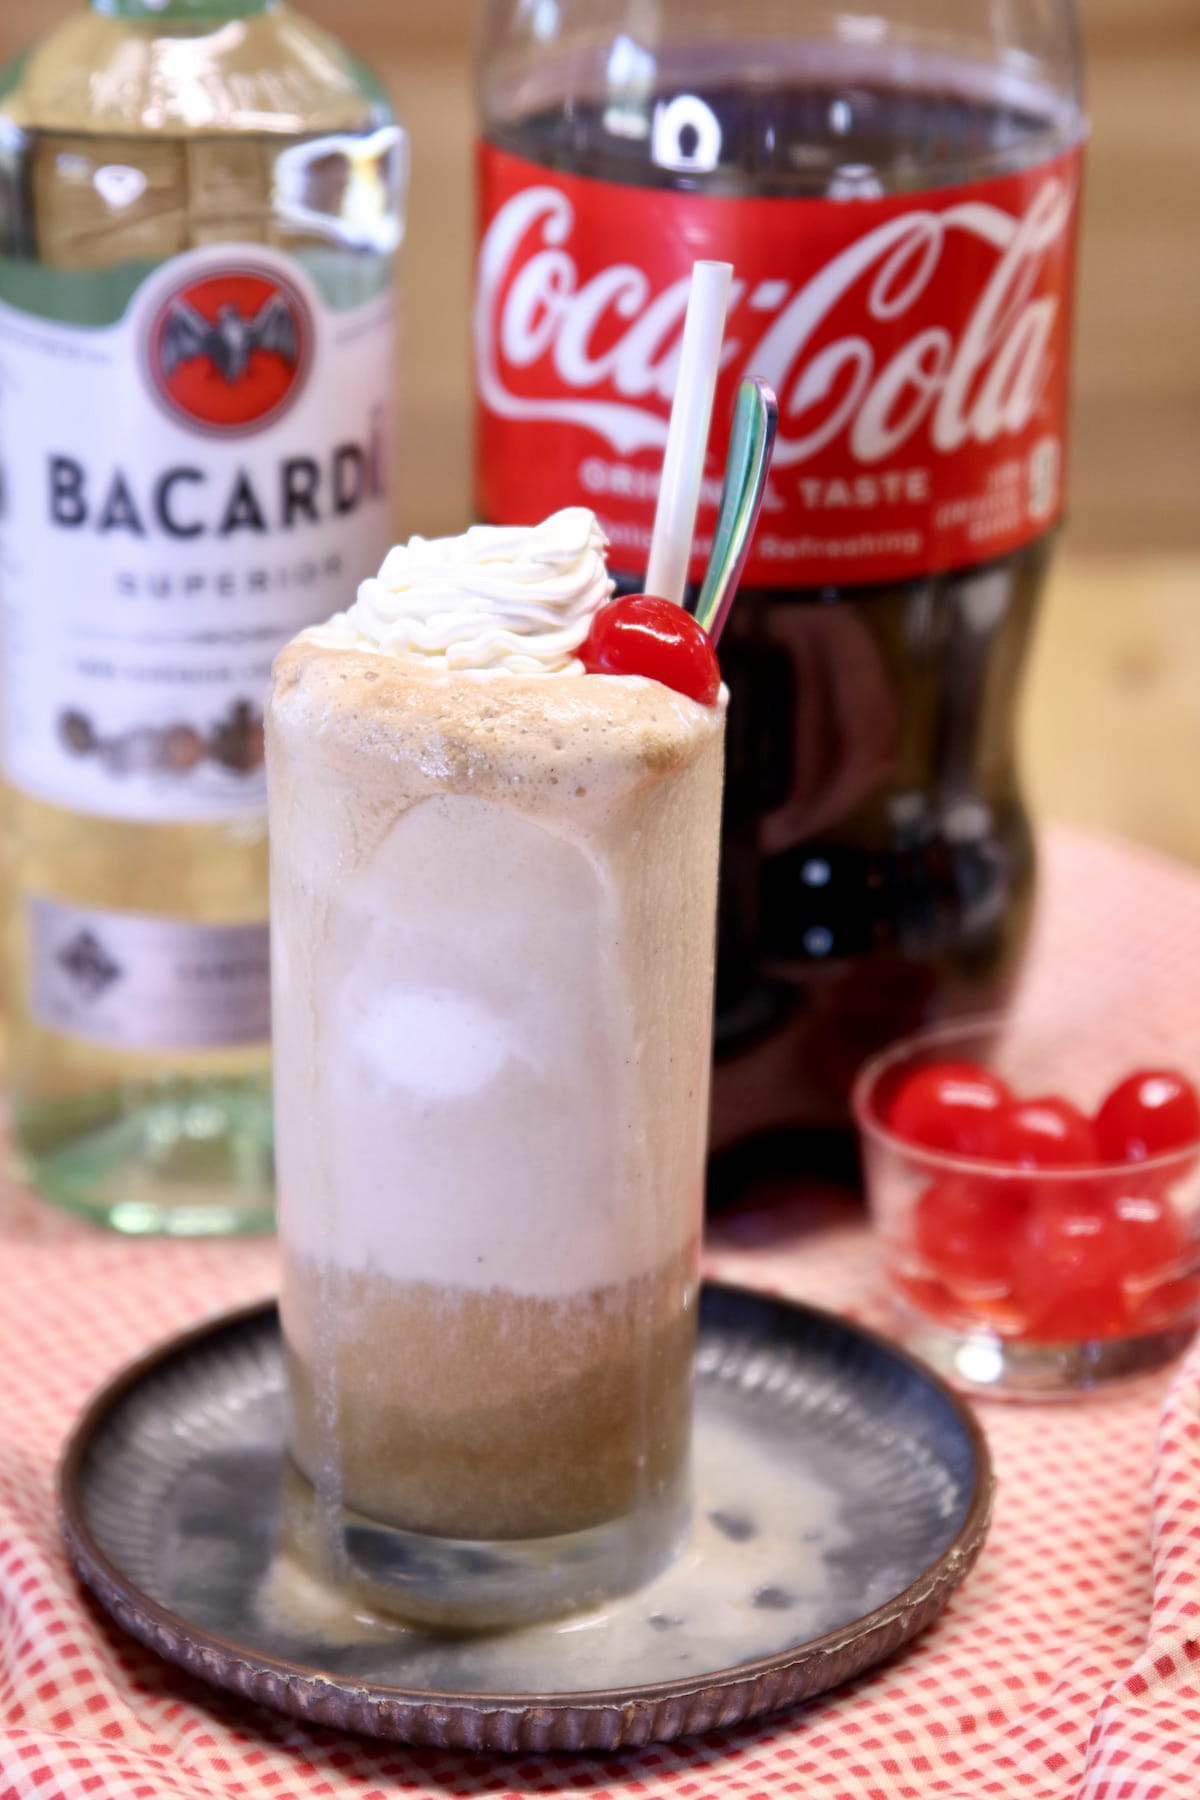 Rum and Coke Float with Bacardi bottle and 2 liter Coke.